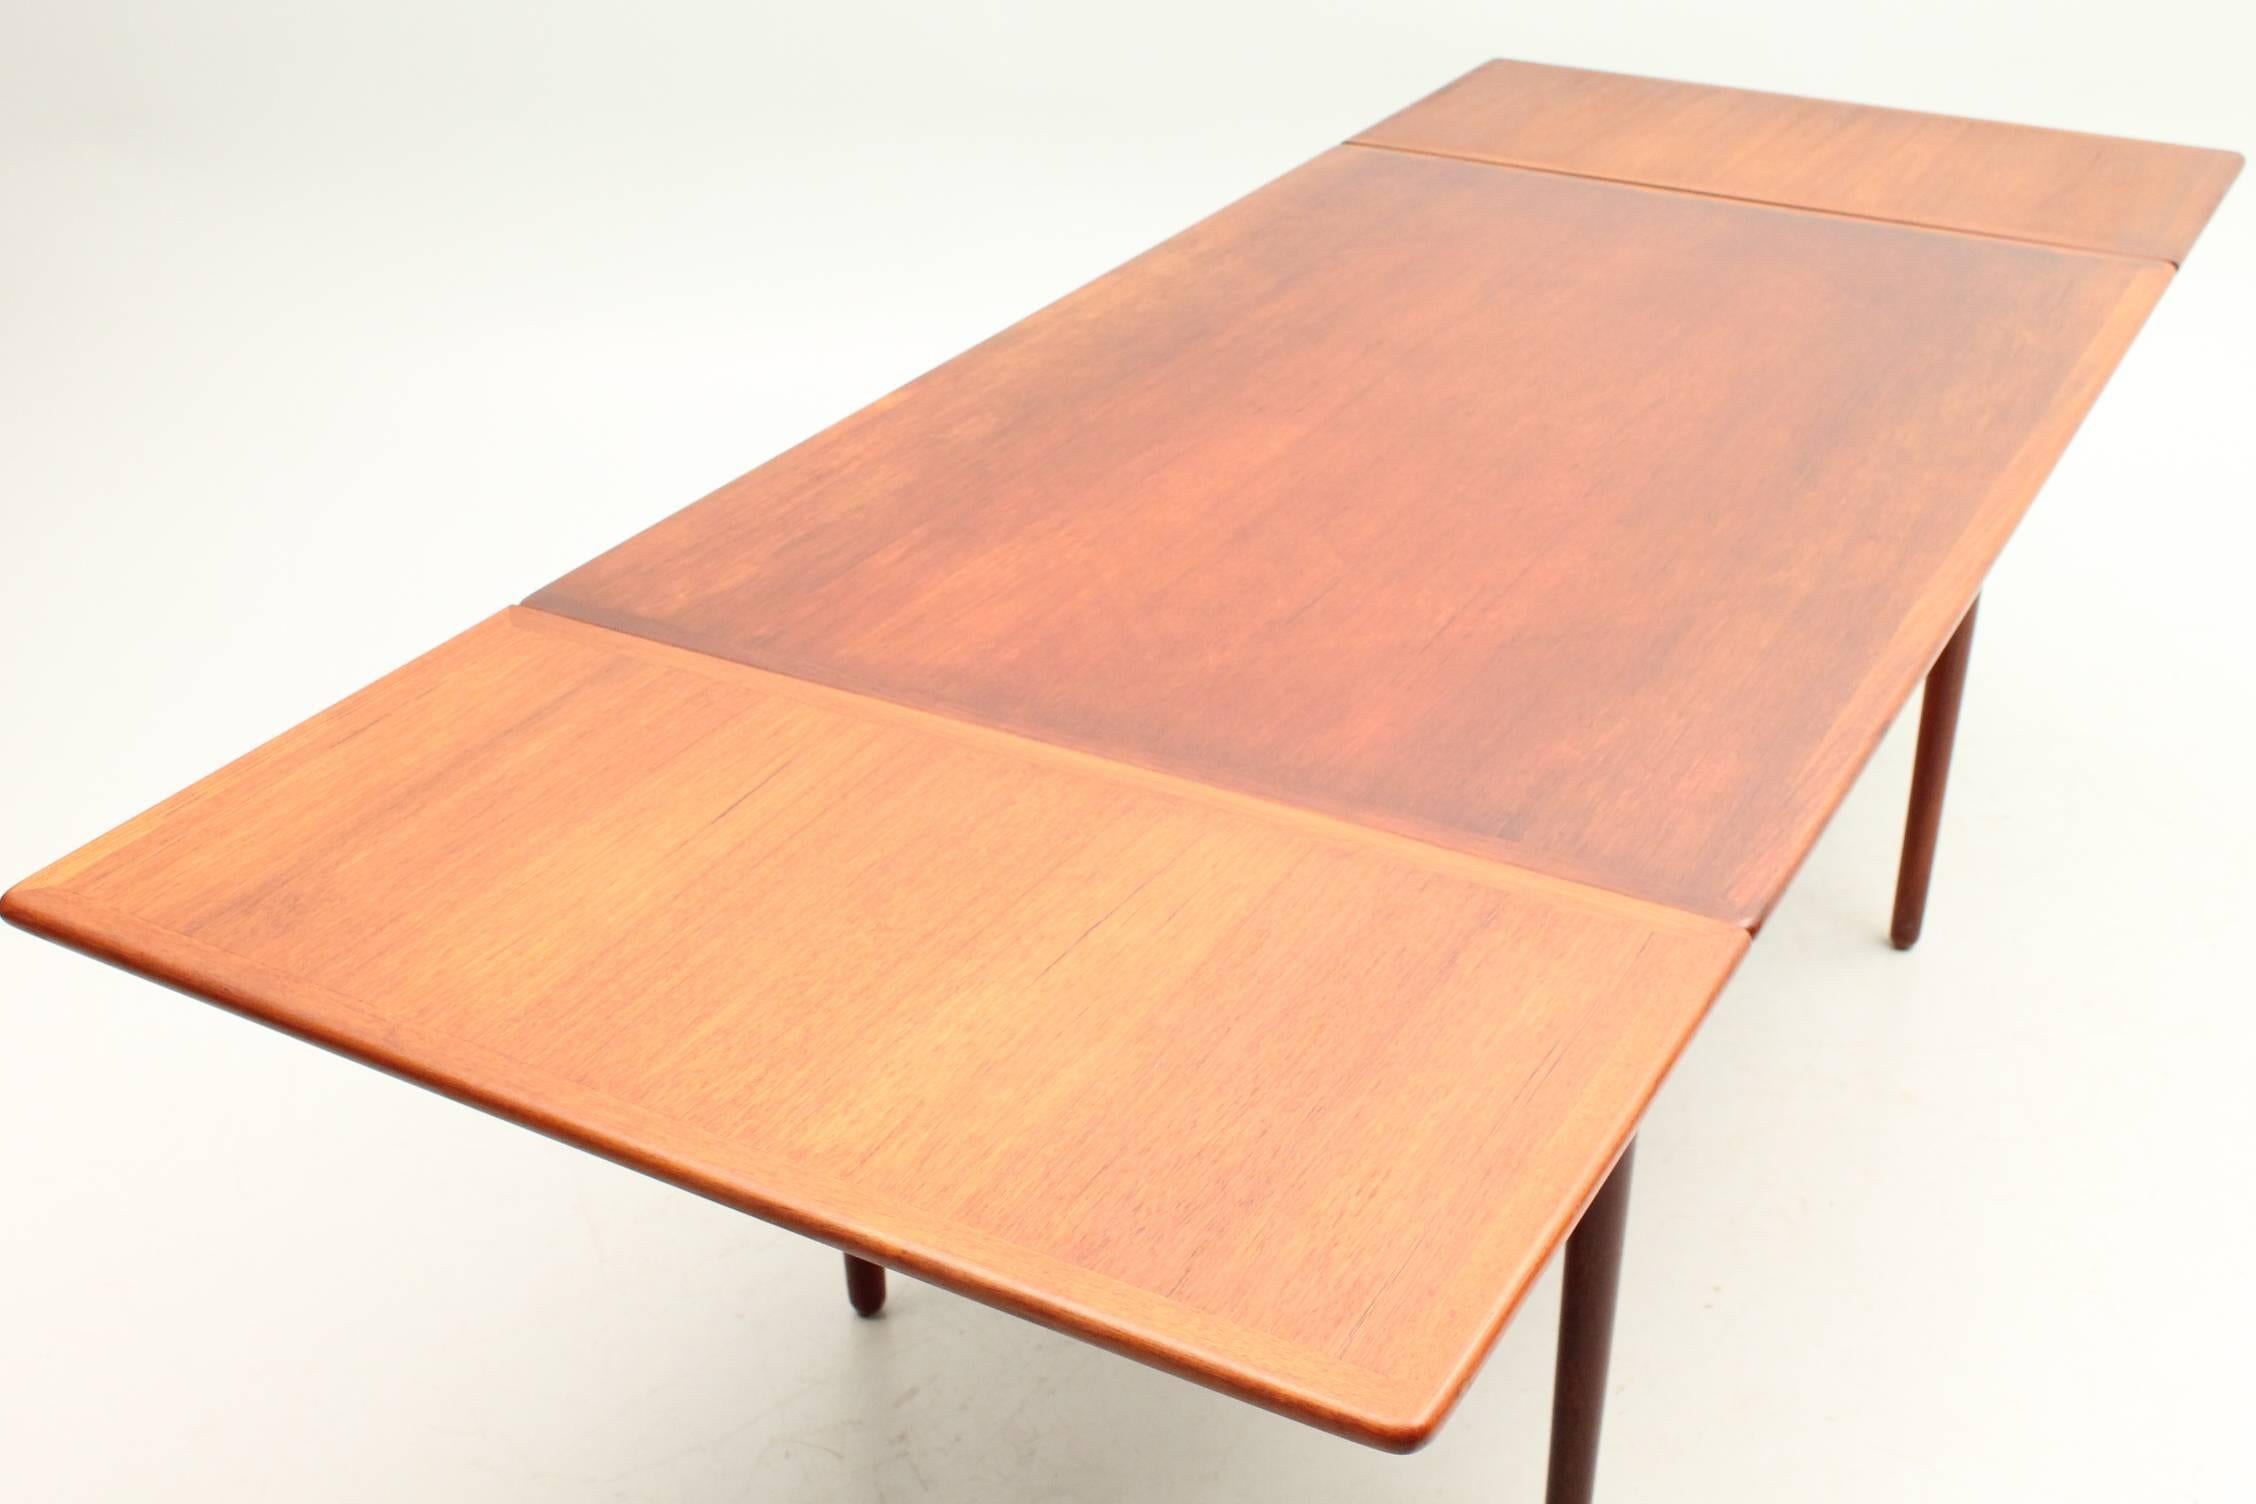 Solid Teak Table or Desk by Ib Kofod Larsen for Christiansen & Larsen In Excellent Condition For Sale In Houston, TX